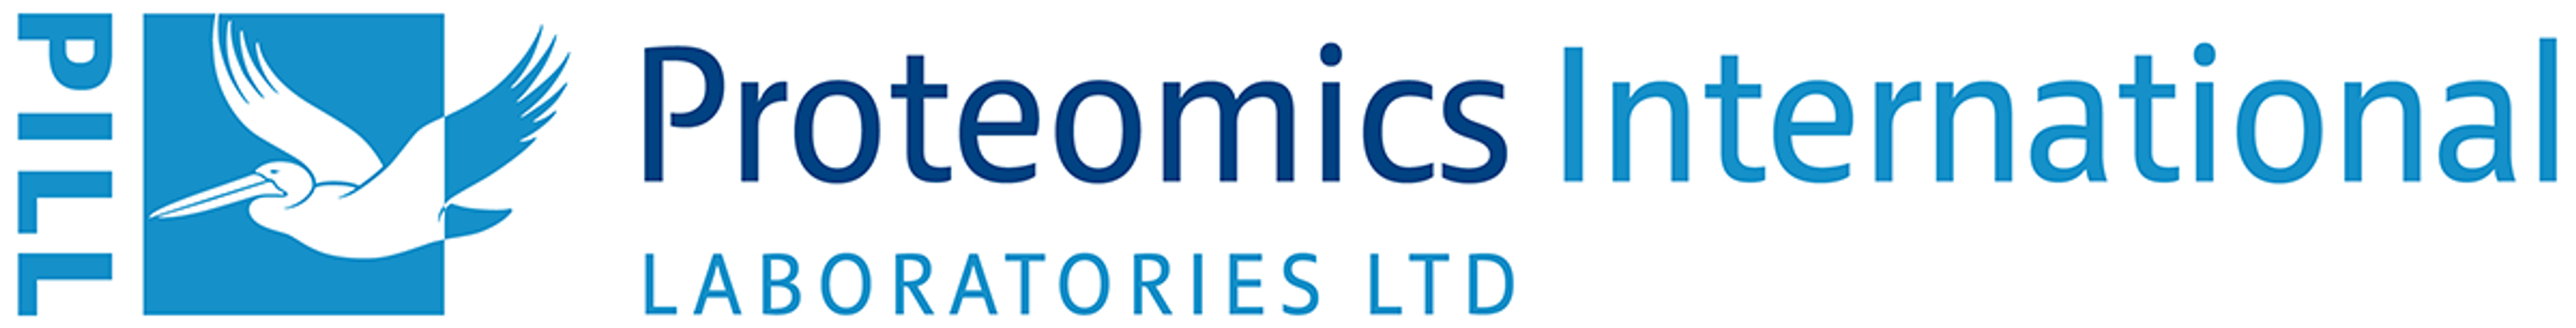 Proteomics - Pharmacokinetic Testing Services